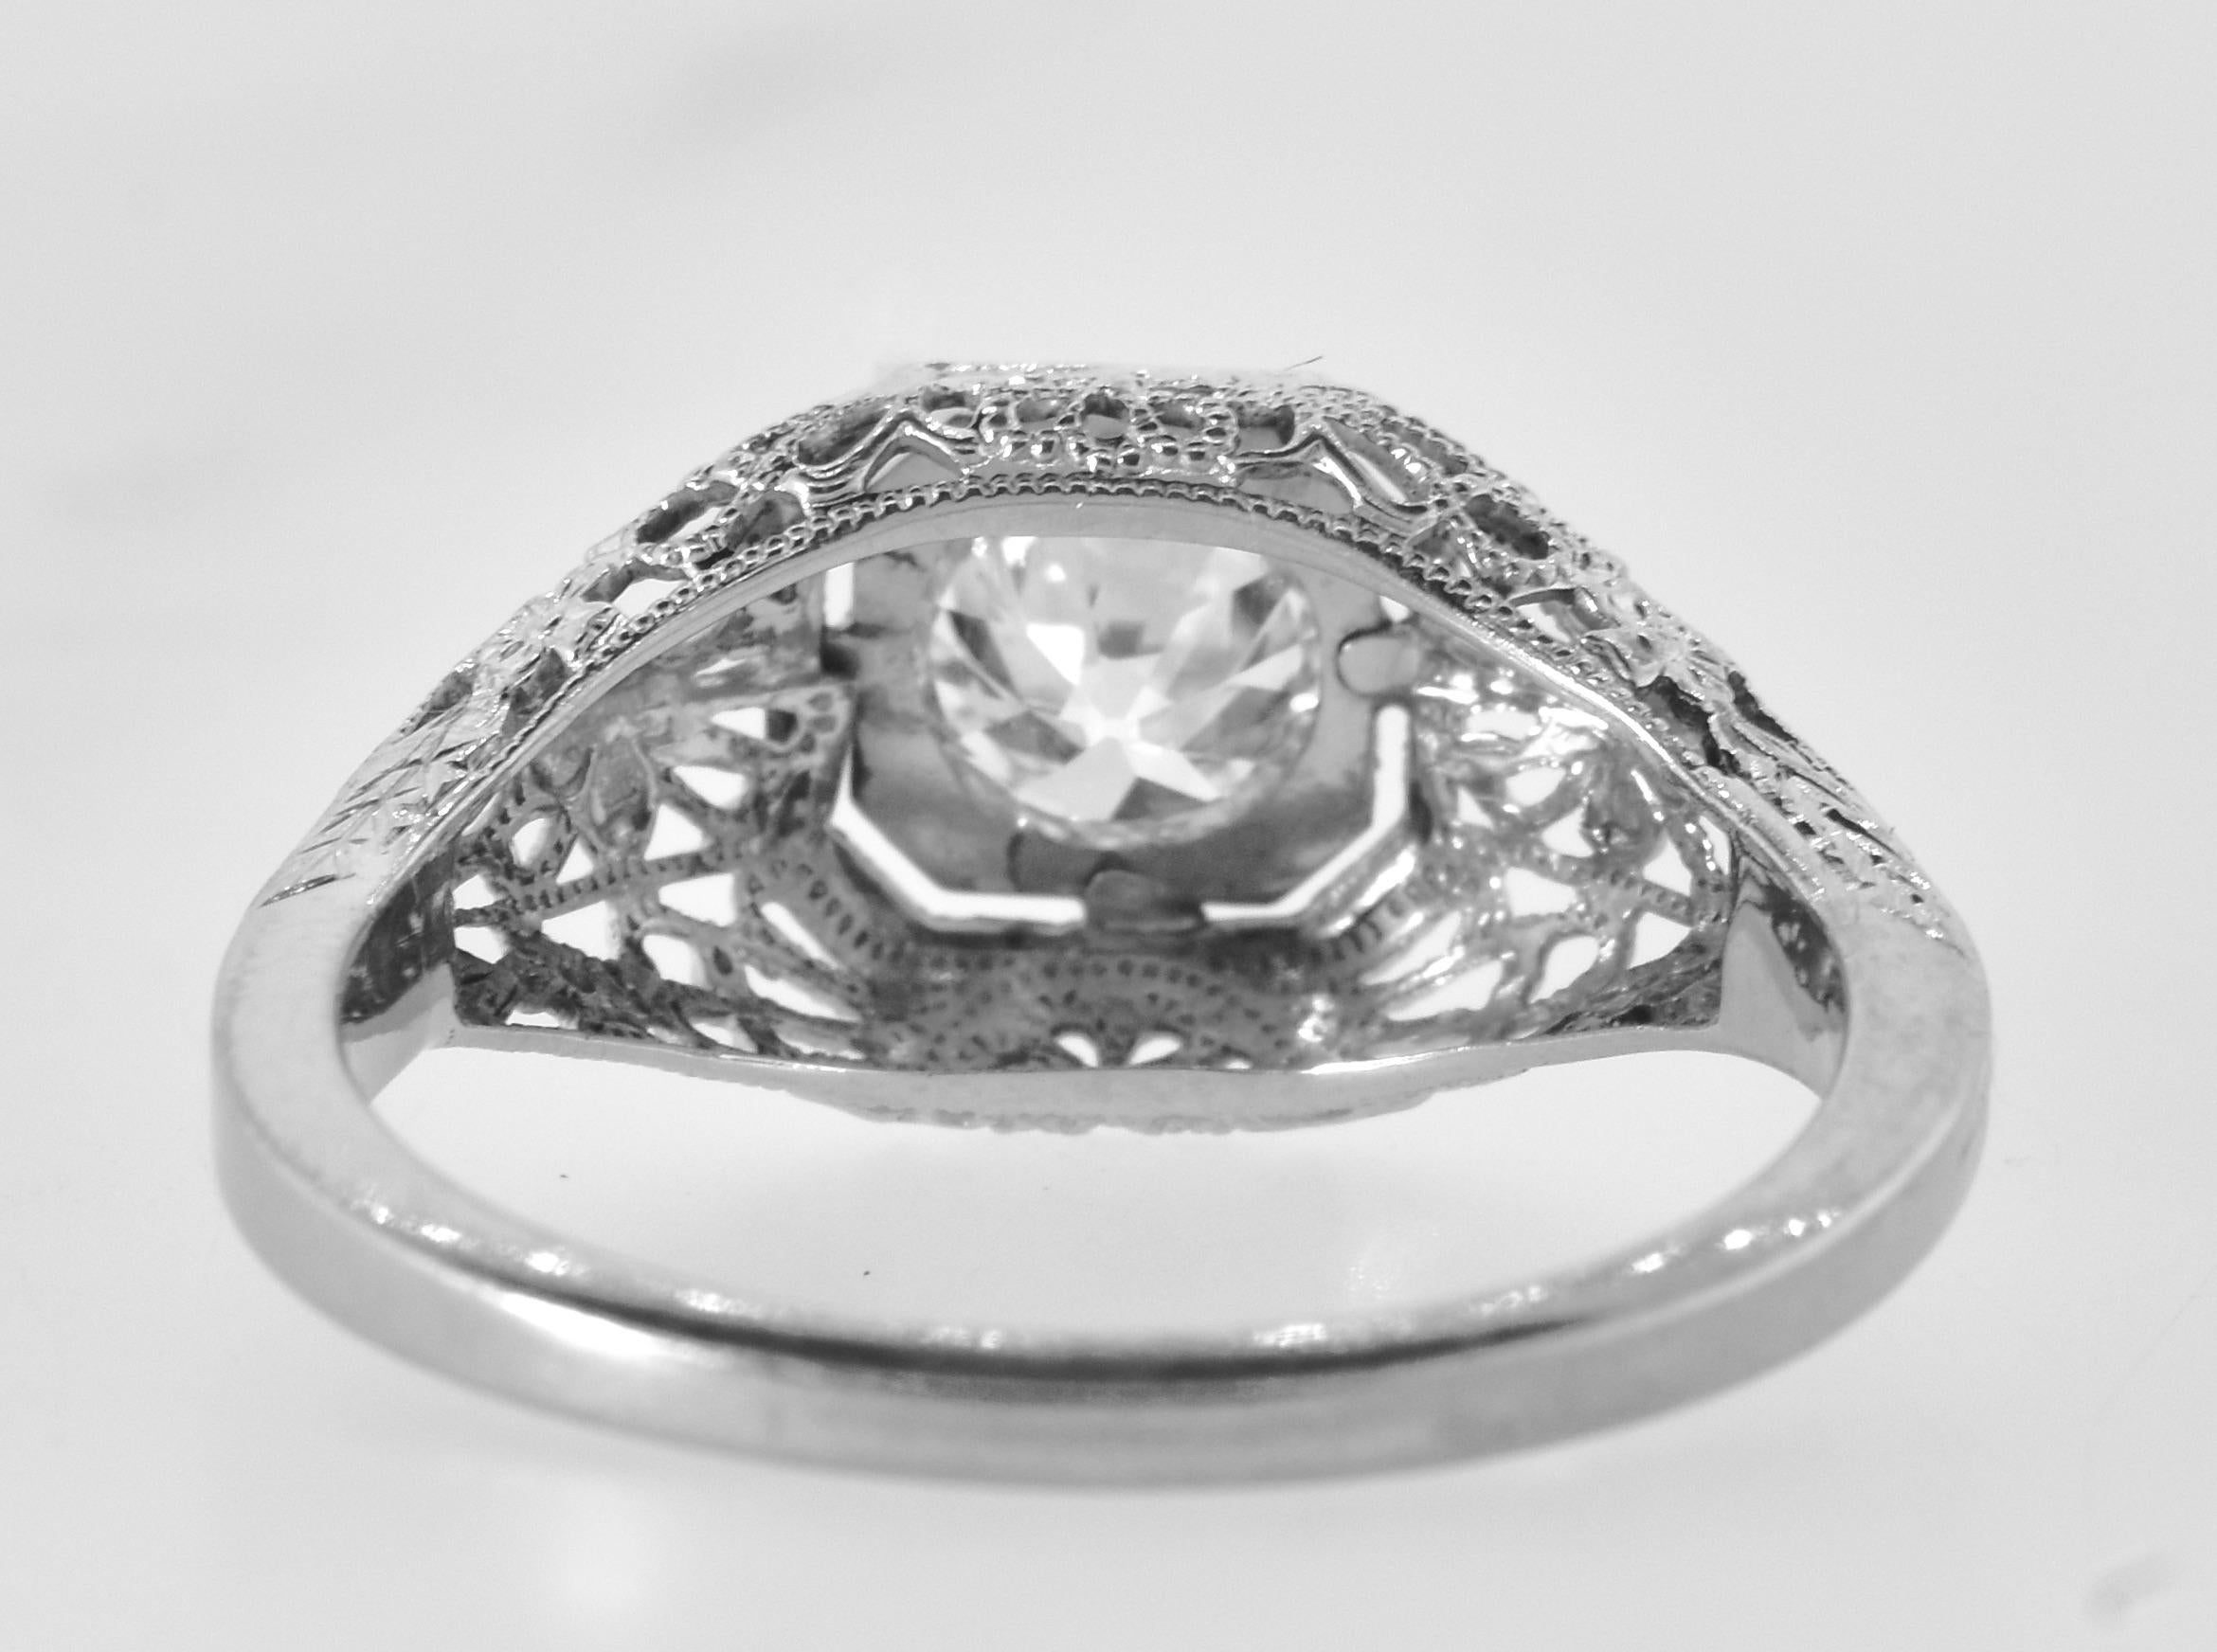 Antique Filigree Ring Fine .65 Ct. Diamond and 18K White Gold, American, c. 1920 For Sale 2